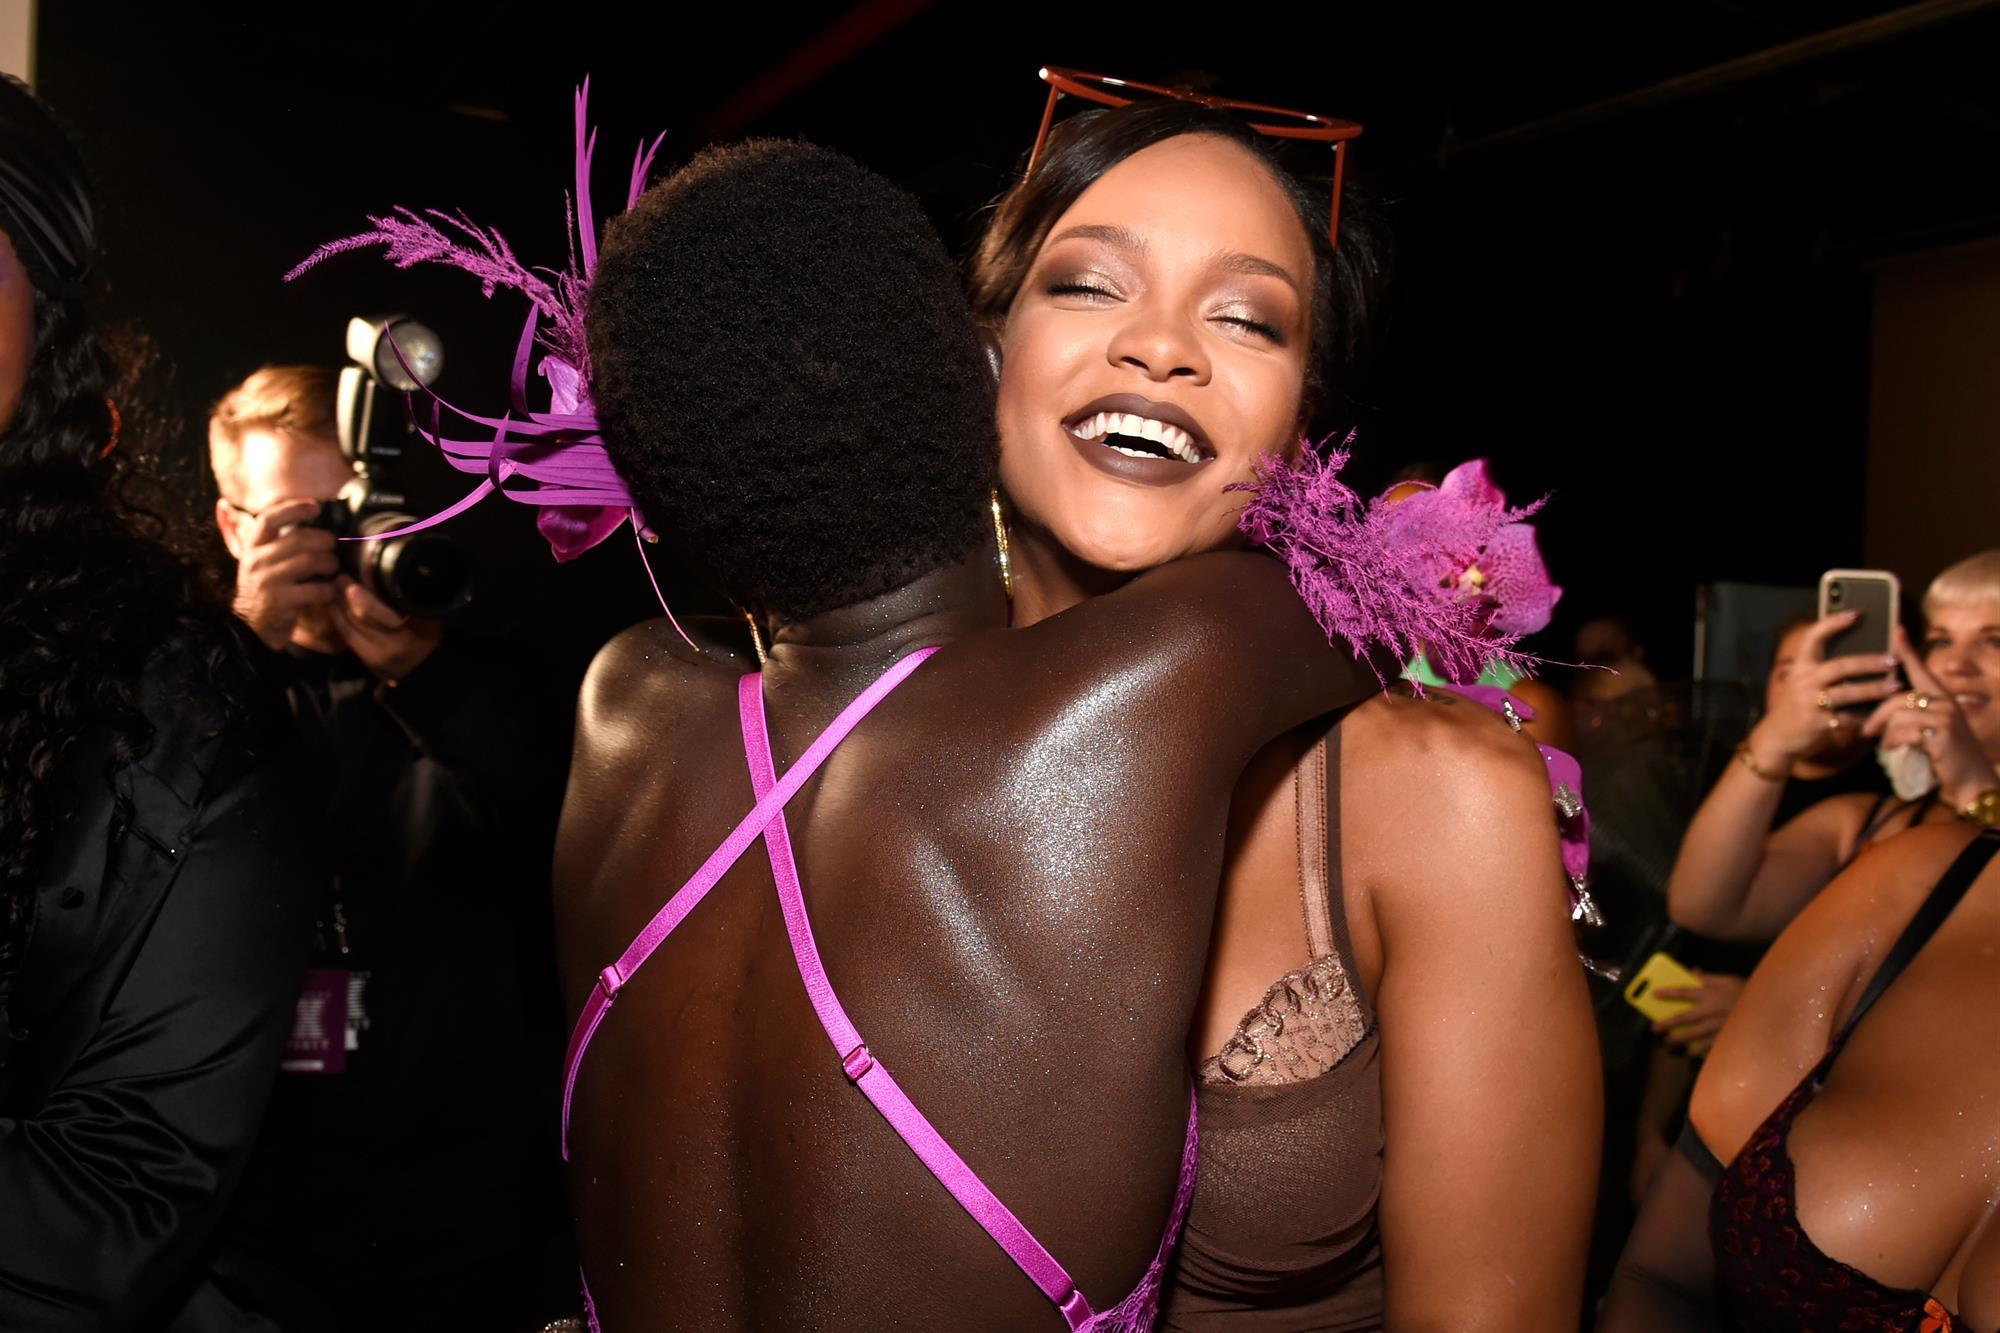 Rihanna Brought Savage X Fenty to Life With a Diverse Celebration